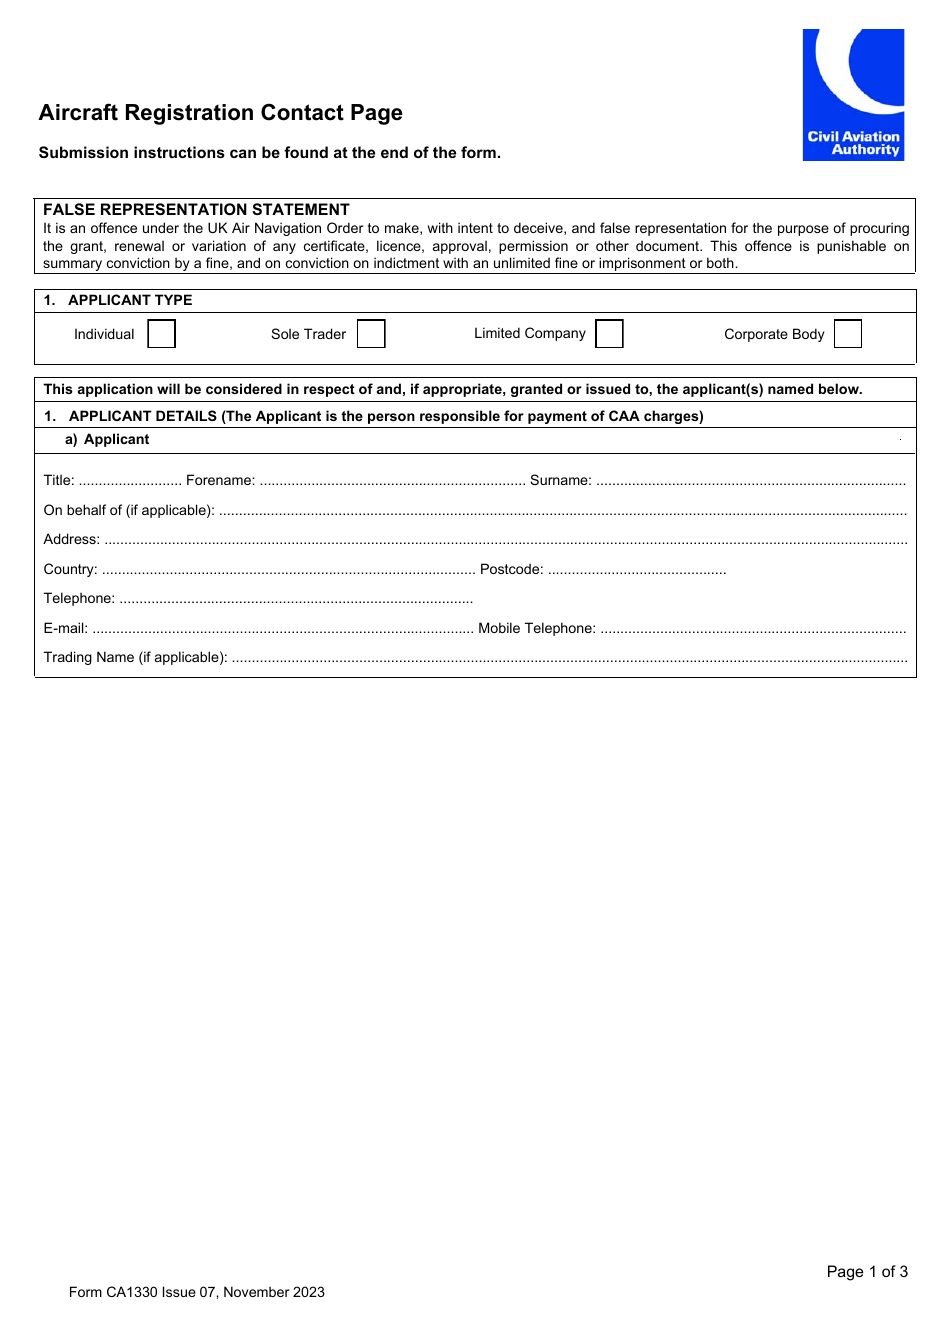 Form CA1330 Aircraft Registration Contact Page - United Kingdom, Page 1